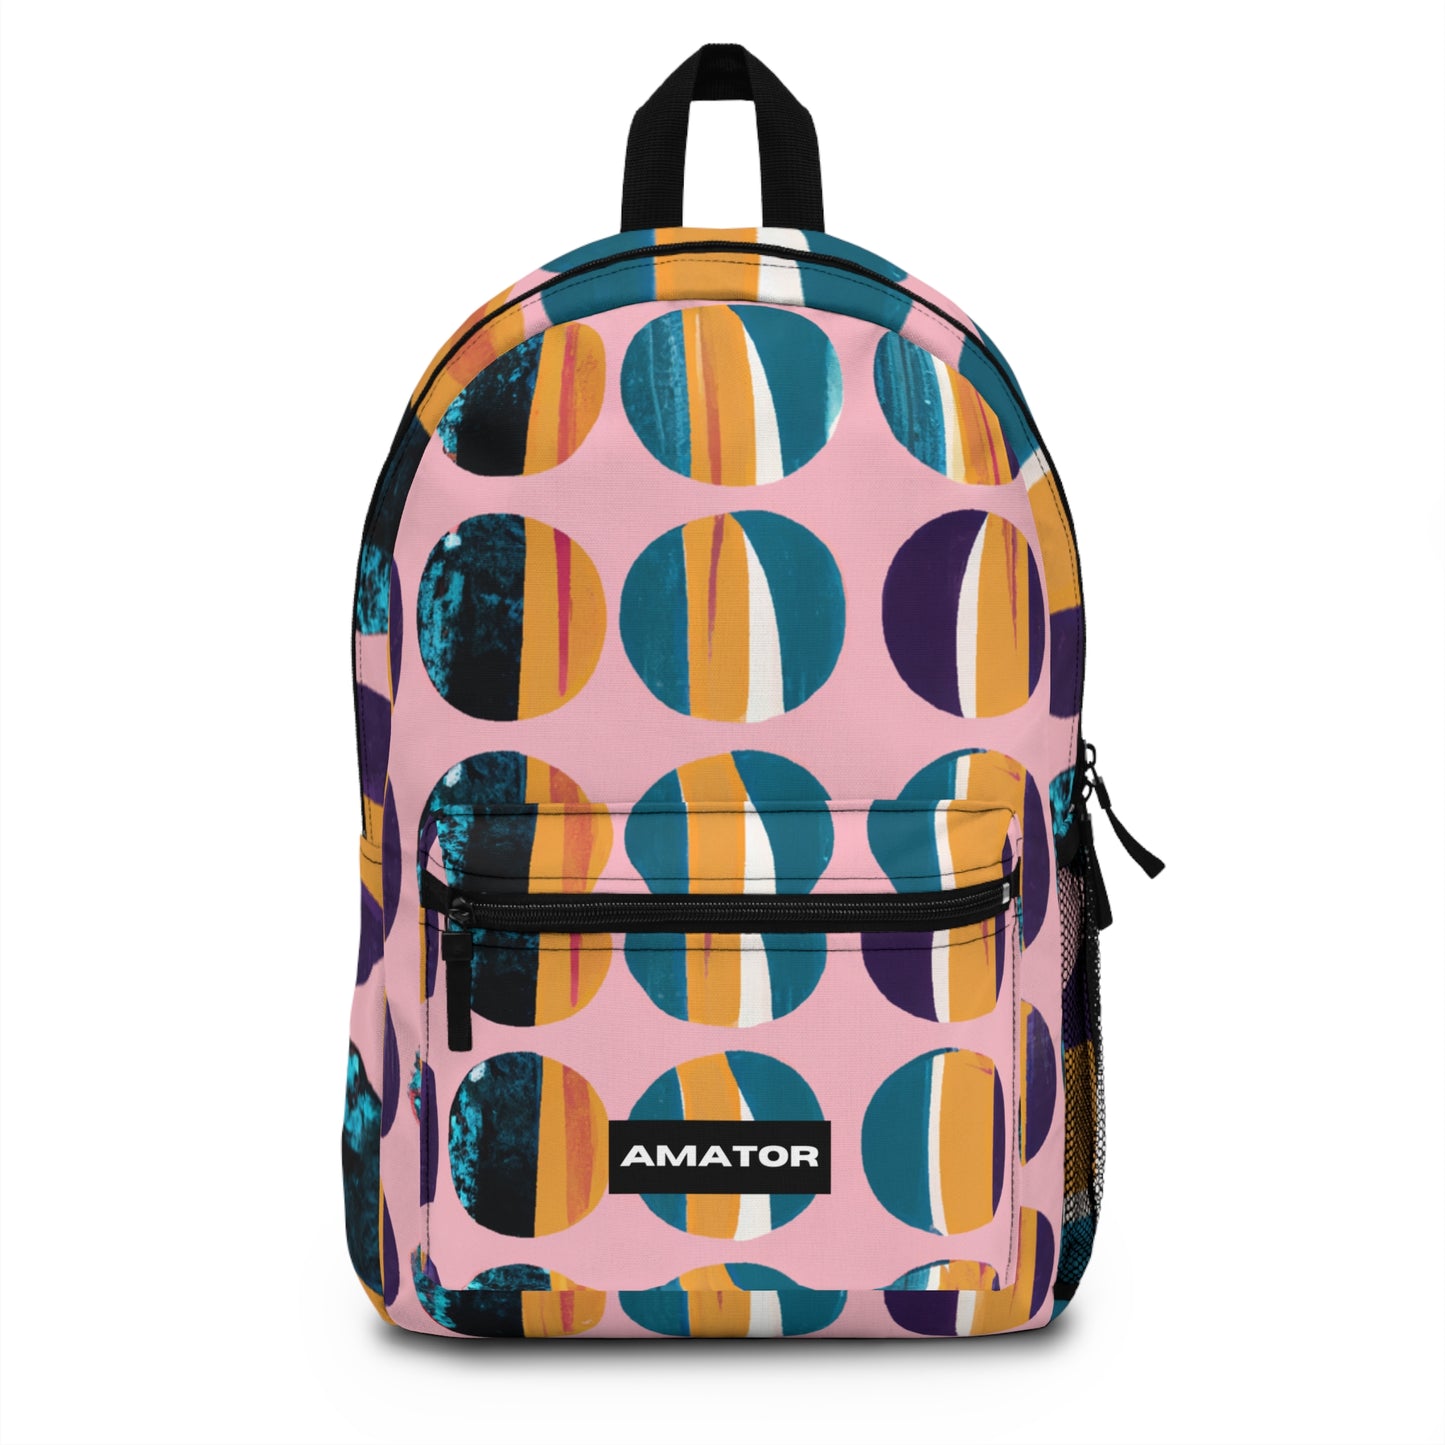 Alexis Galvin Backpack